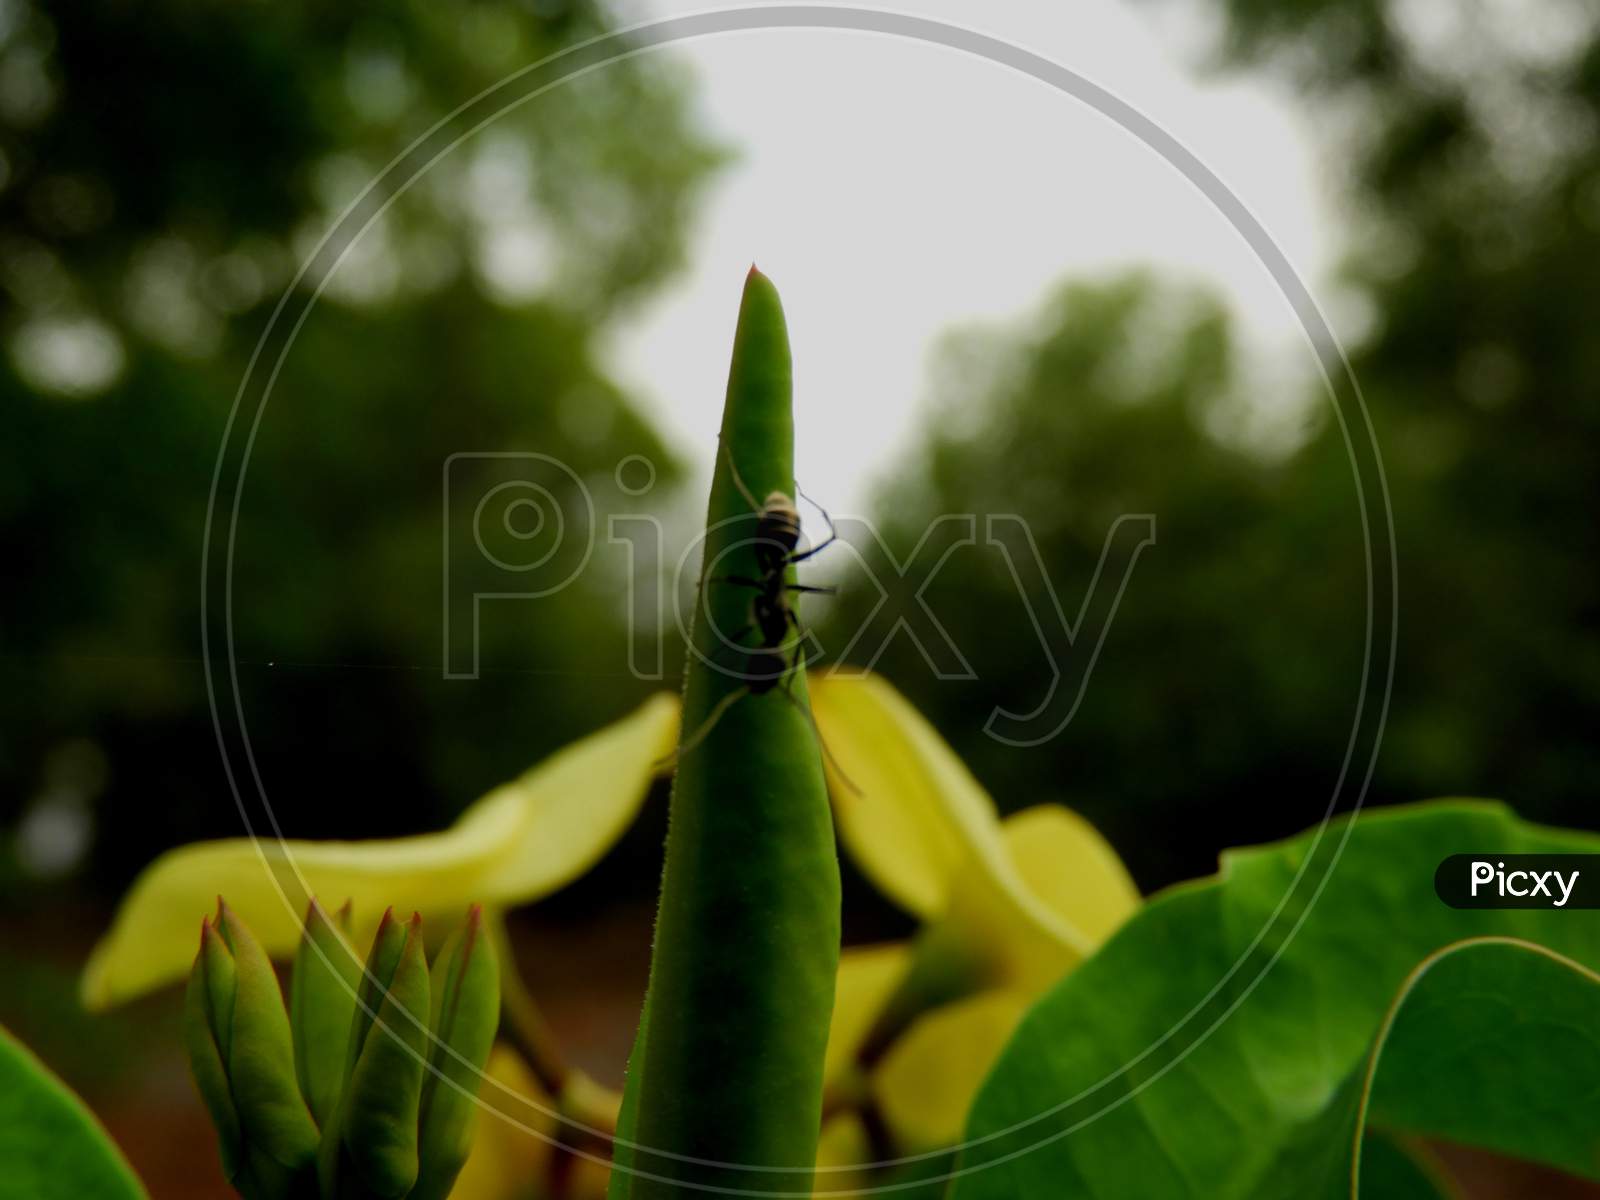 An ant on yellow flower